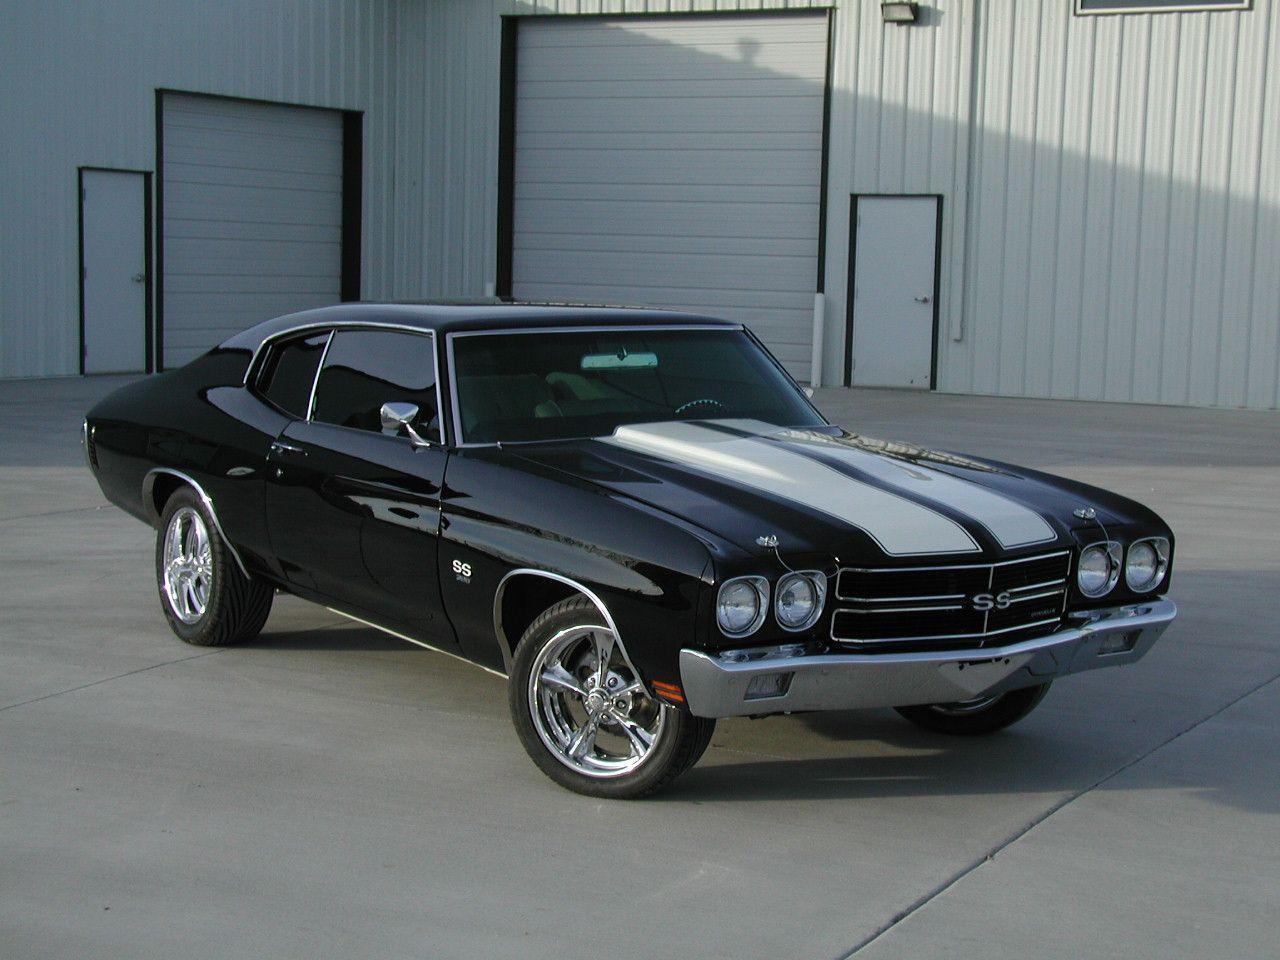 gotta luv dem muscle cars!. Start Your Engines